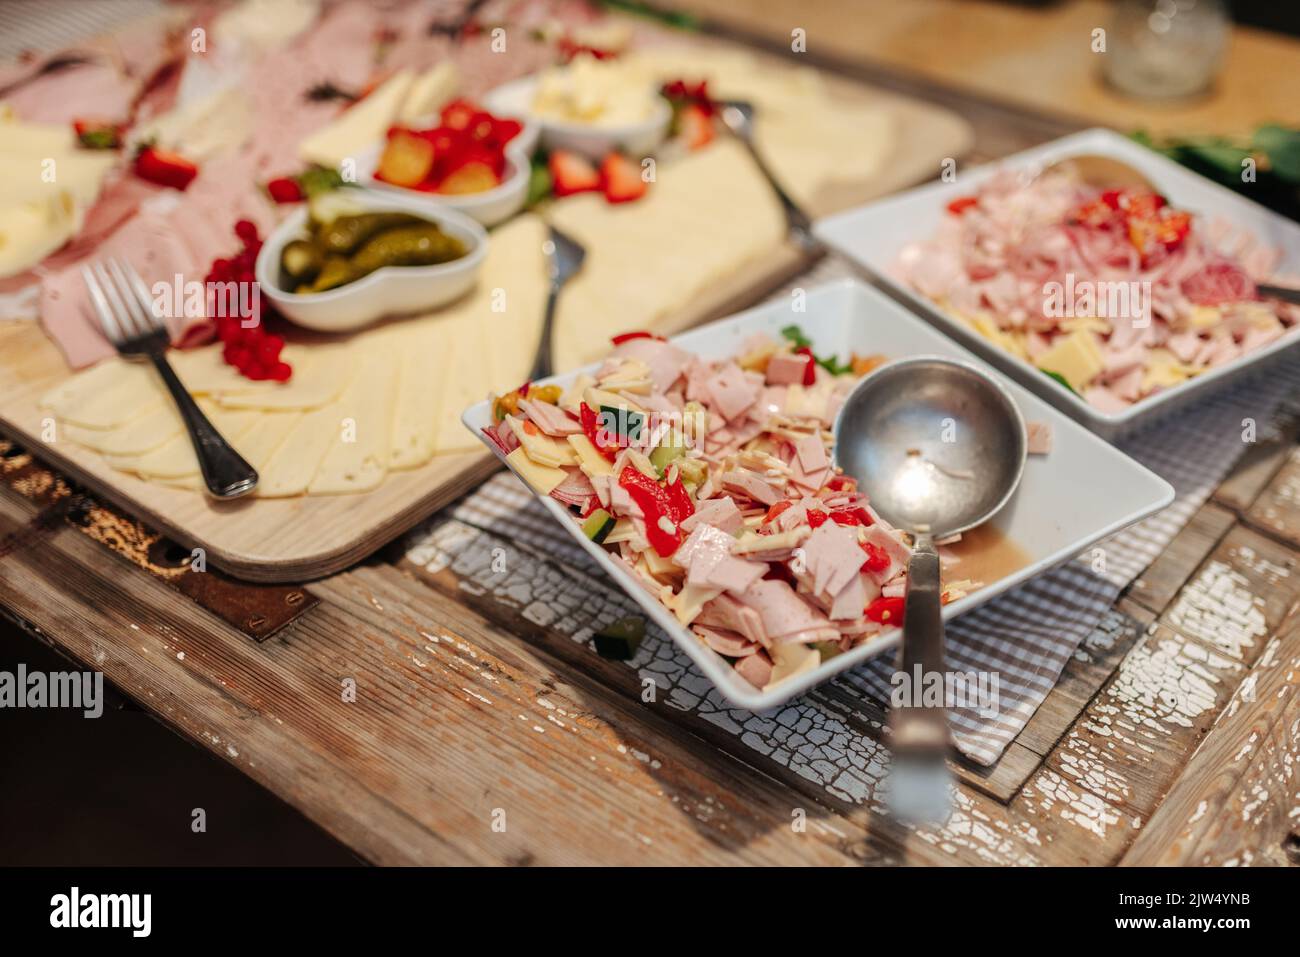 Meat and cheese platter at a buffet Stock Photo